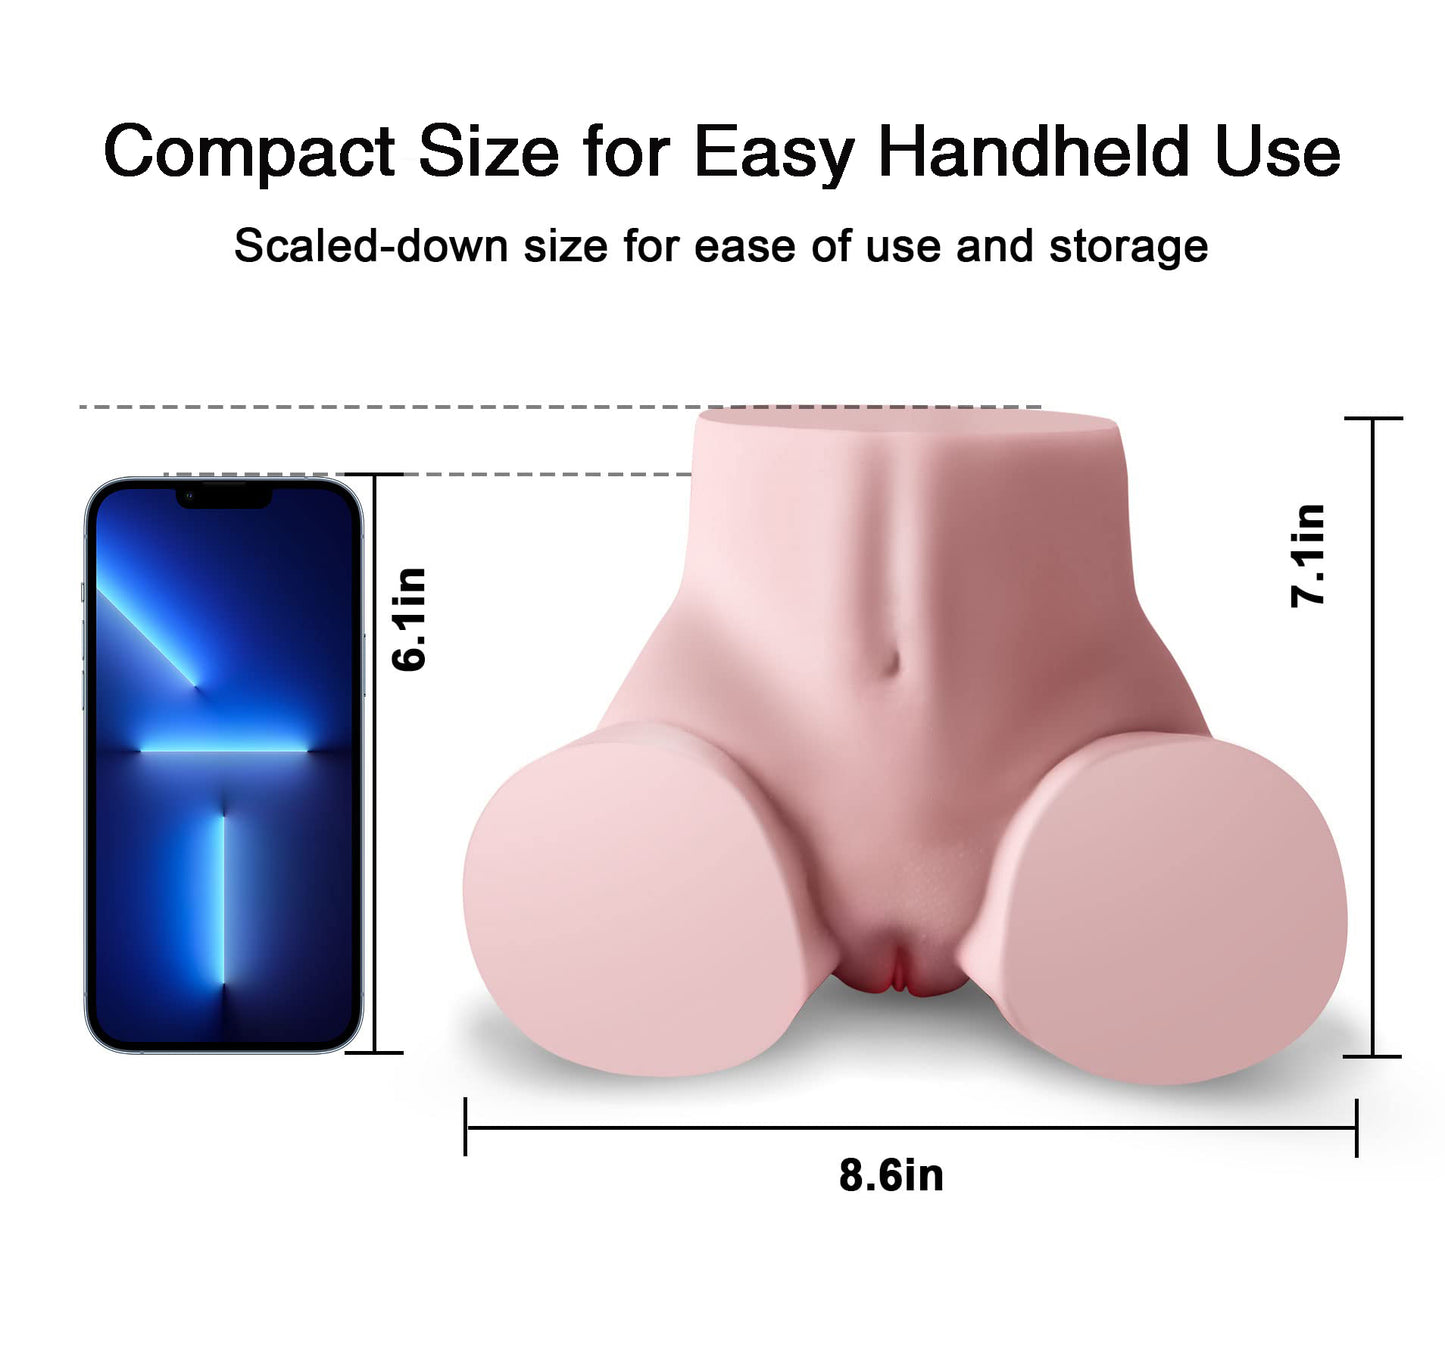 Sex Doll Male Sex Toy for Men, Pocket Pussy Ass Sex Dolls Torso Love Doll with Realistic Vagina Anus, Adult Sex Toys for Men (8.6X7.1X4.7In, 5.5LB)